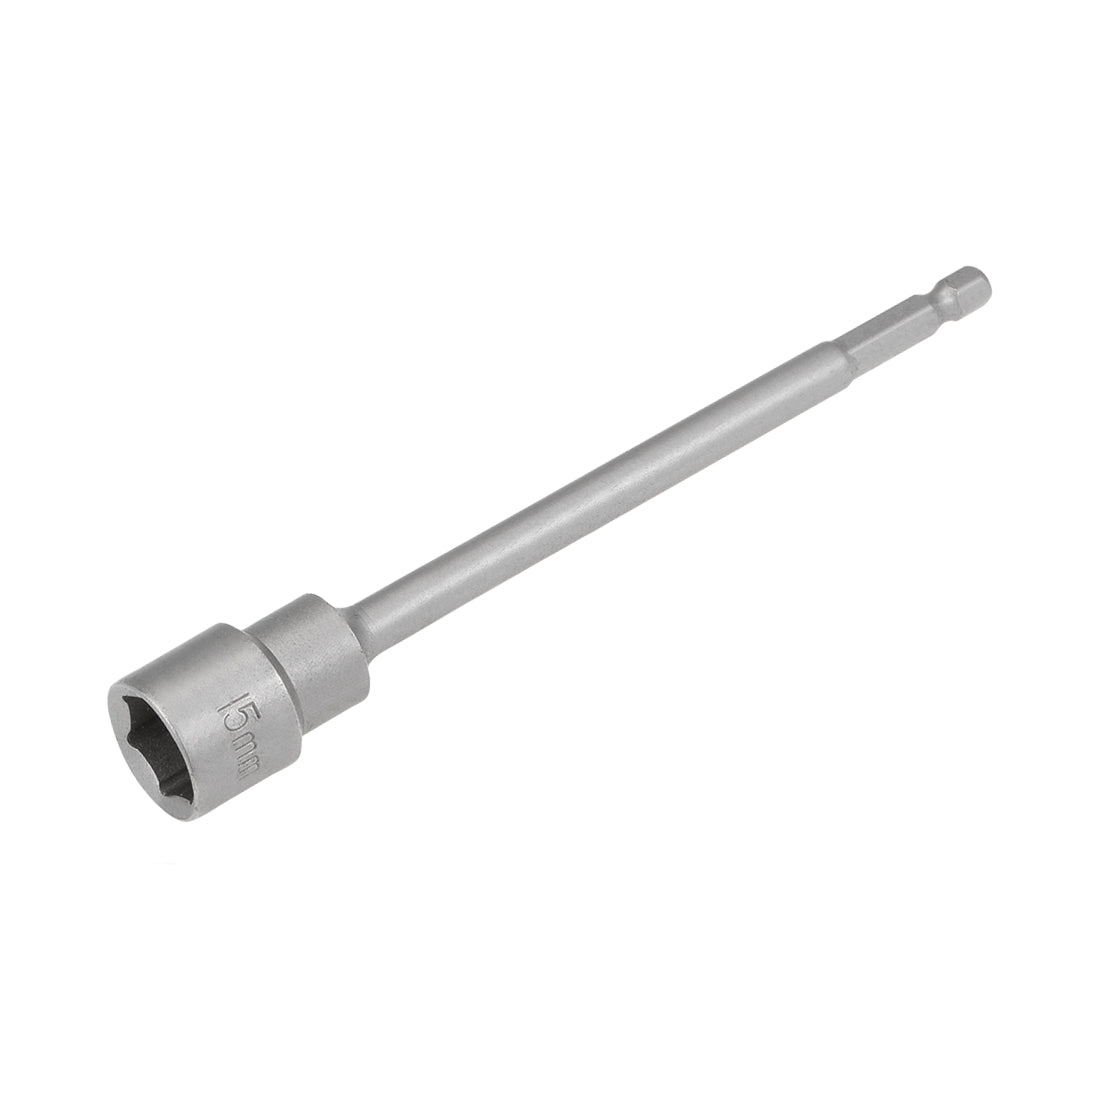 Uxcell Uxcell 1/4" Quick-Change Hex Shank 6mm Magnetic Nut Sockets Driver Wrench, 150mm Length